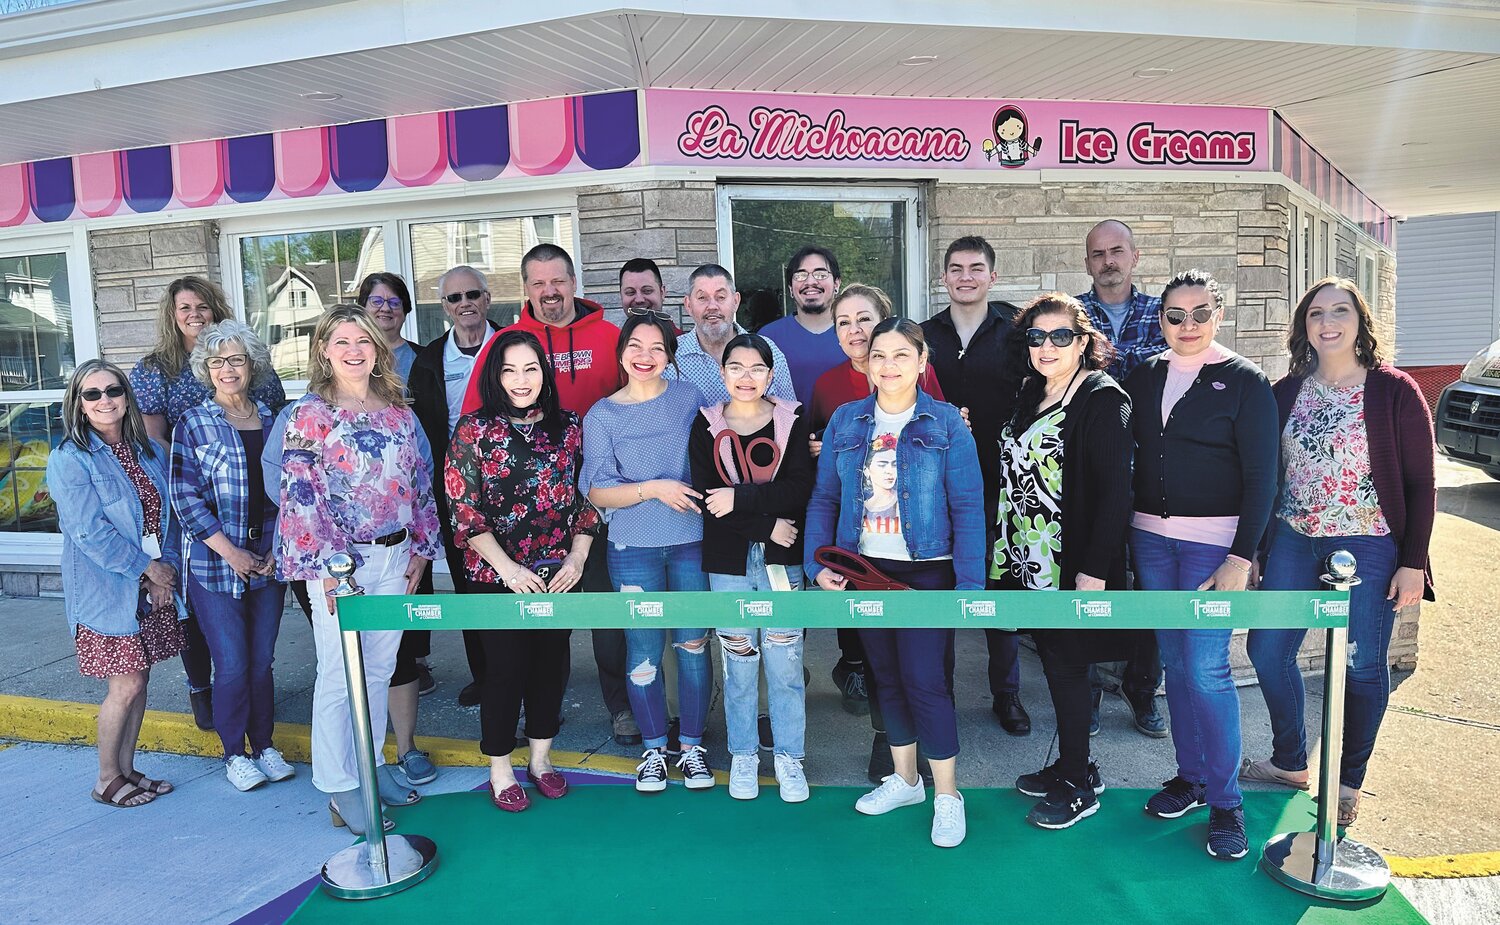 The Crawfordsville/Montgomery County Chamber of Commerce was excited to host a ribbon cutting for the grand opening of Ice Creams La Michoacana which is owned by the Schu family.